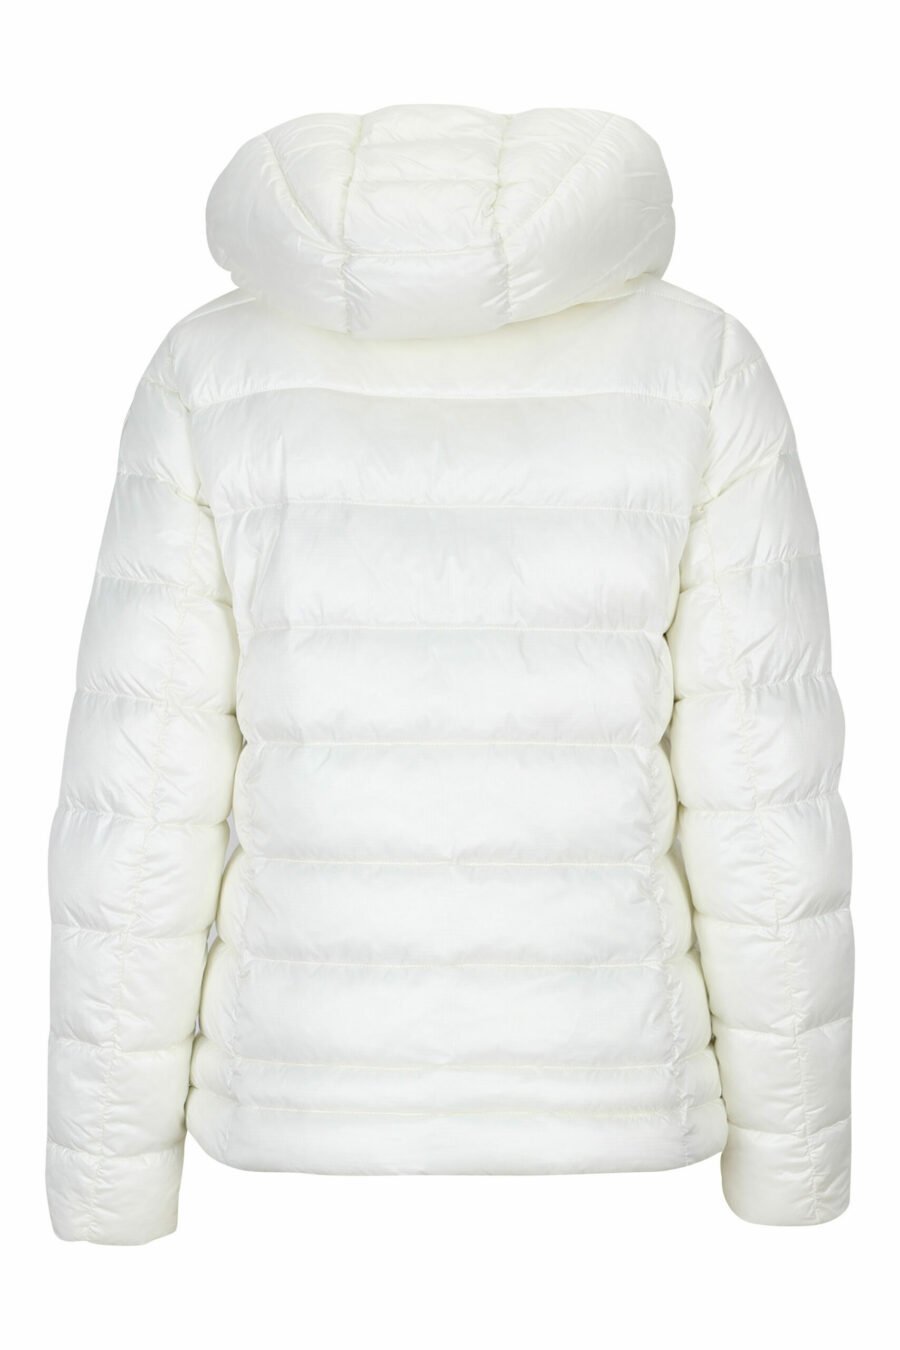 White straight lined hooded jacket with beige inside with logo patch - 8058610675653 3 scaled